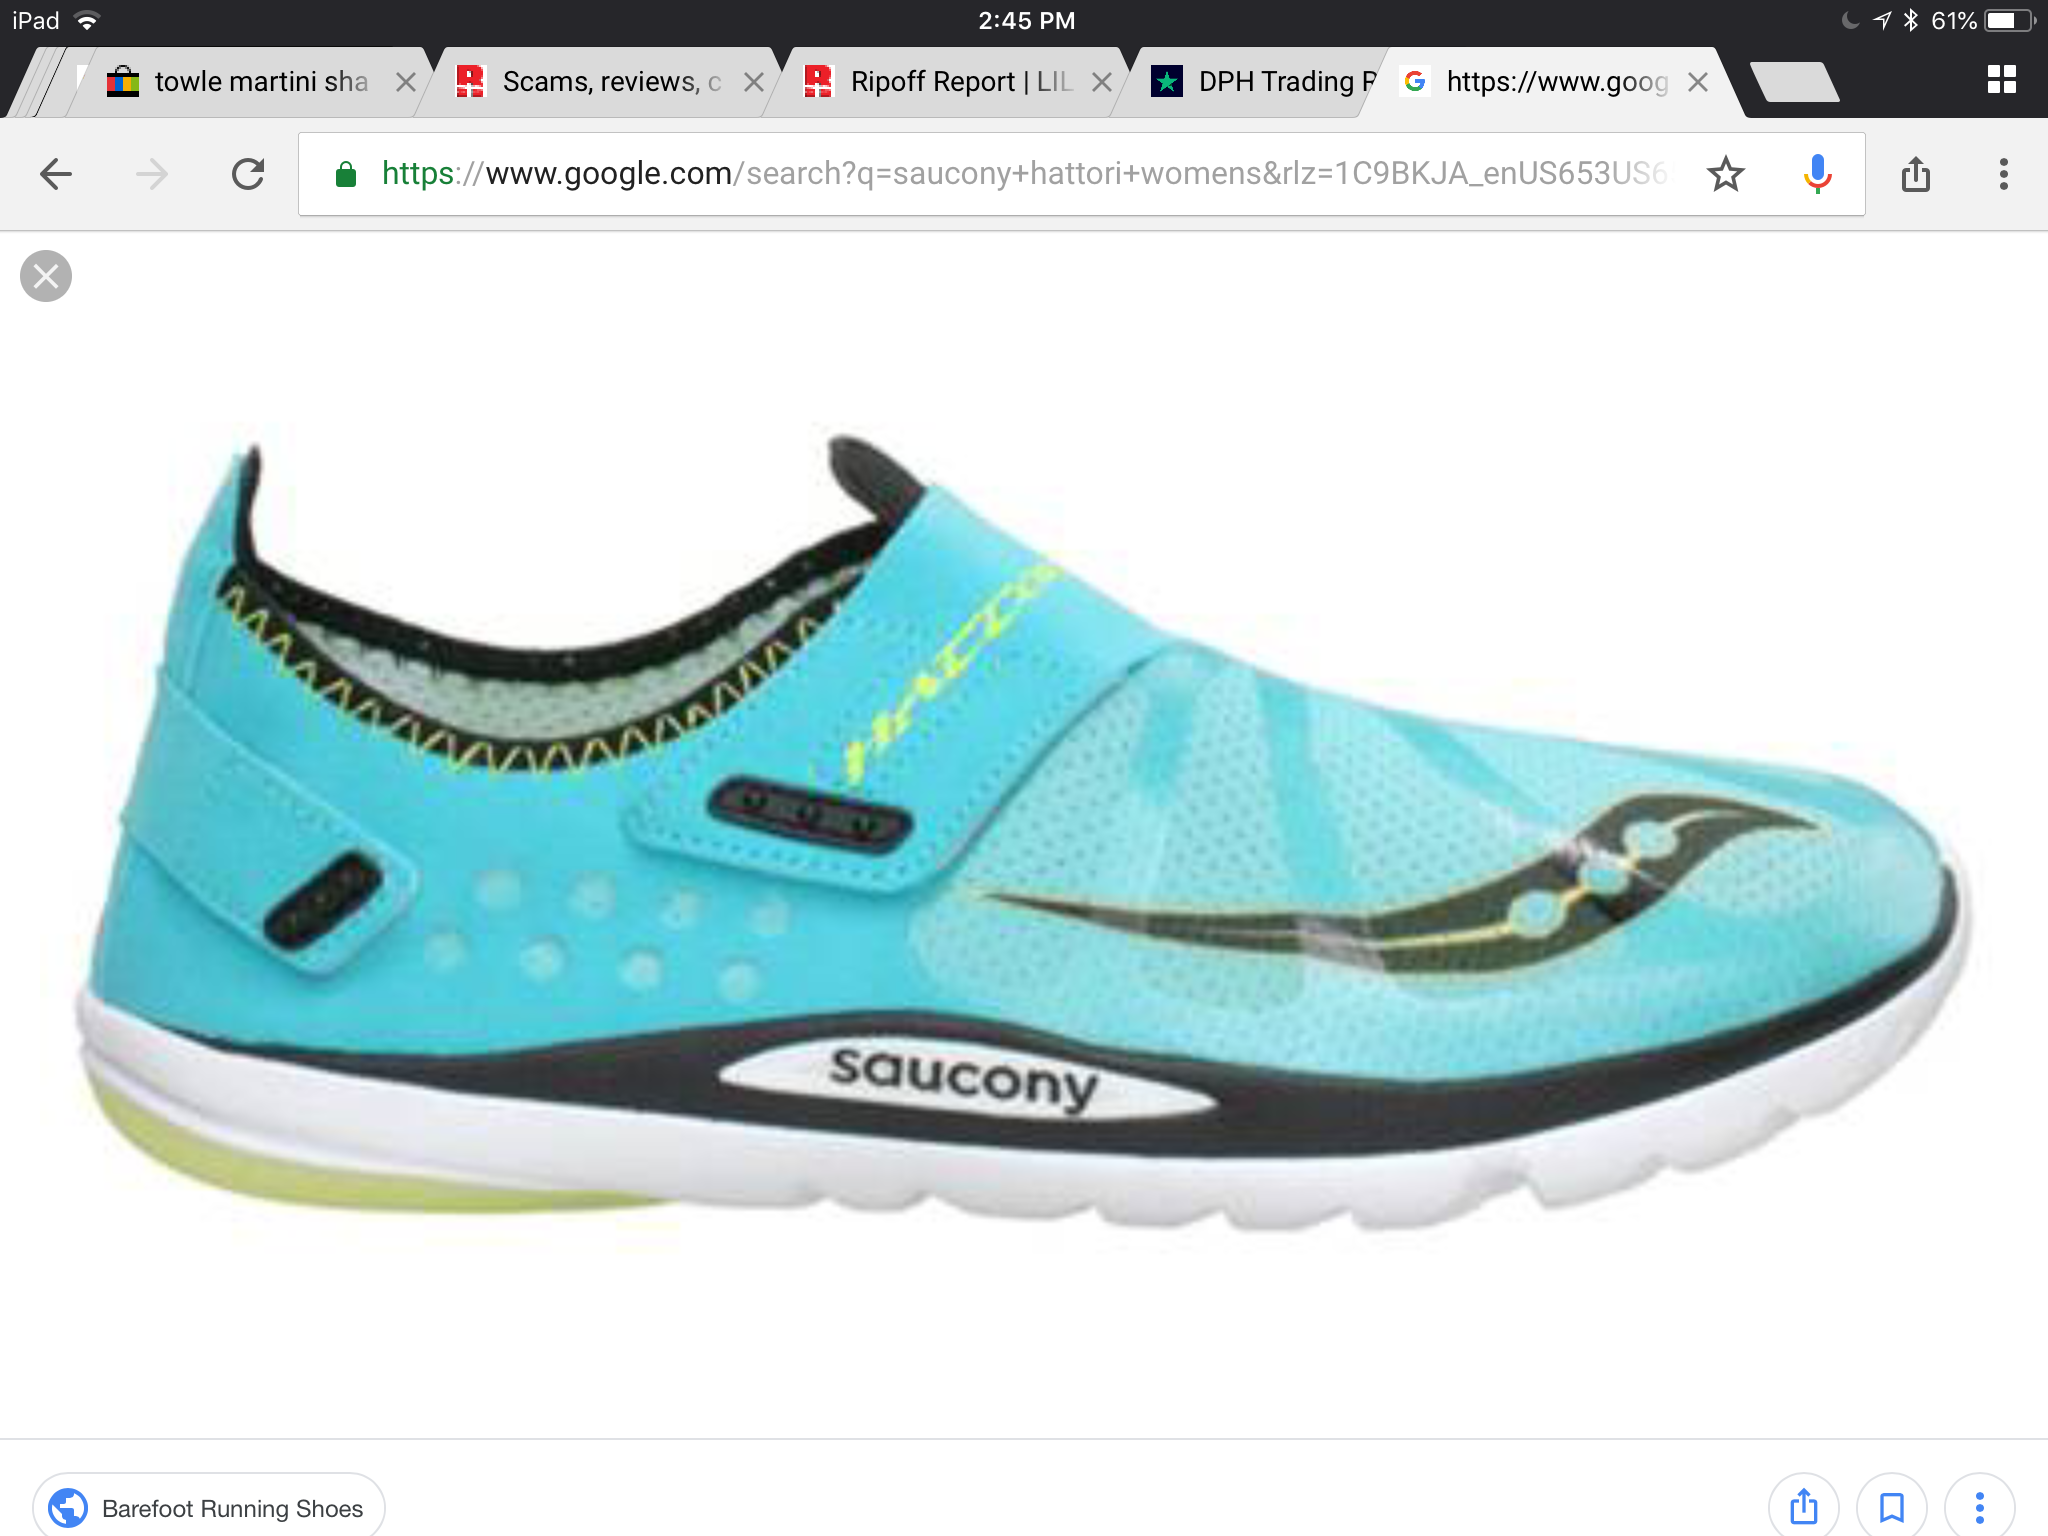 I ordered this Saucony shoe in a size 9 ladies